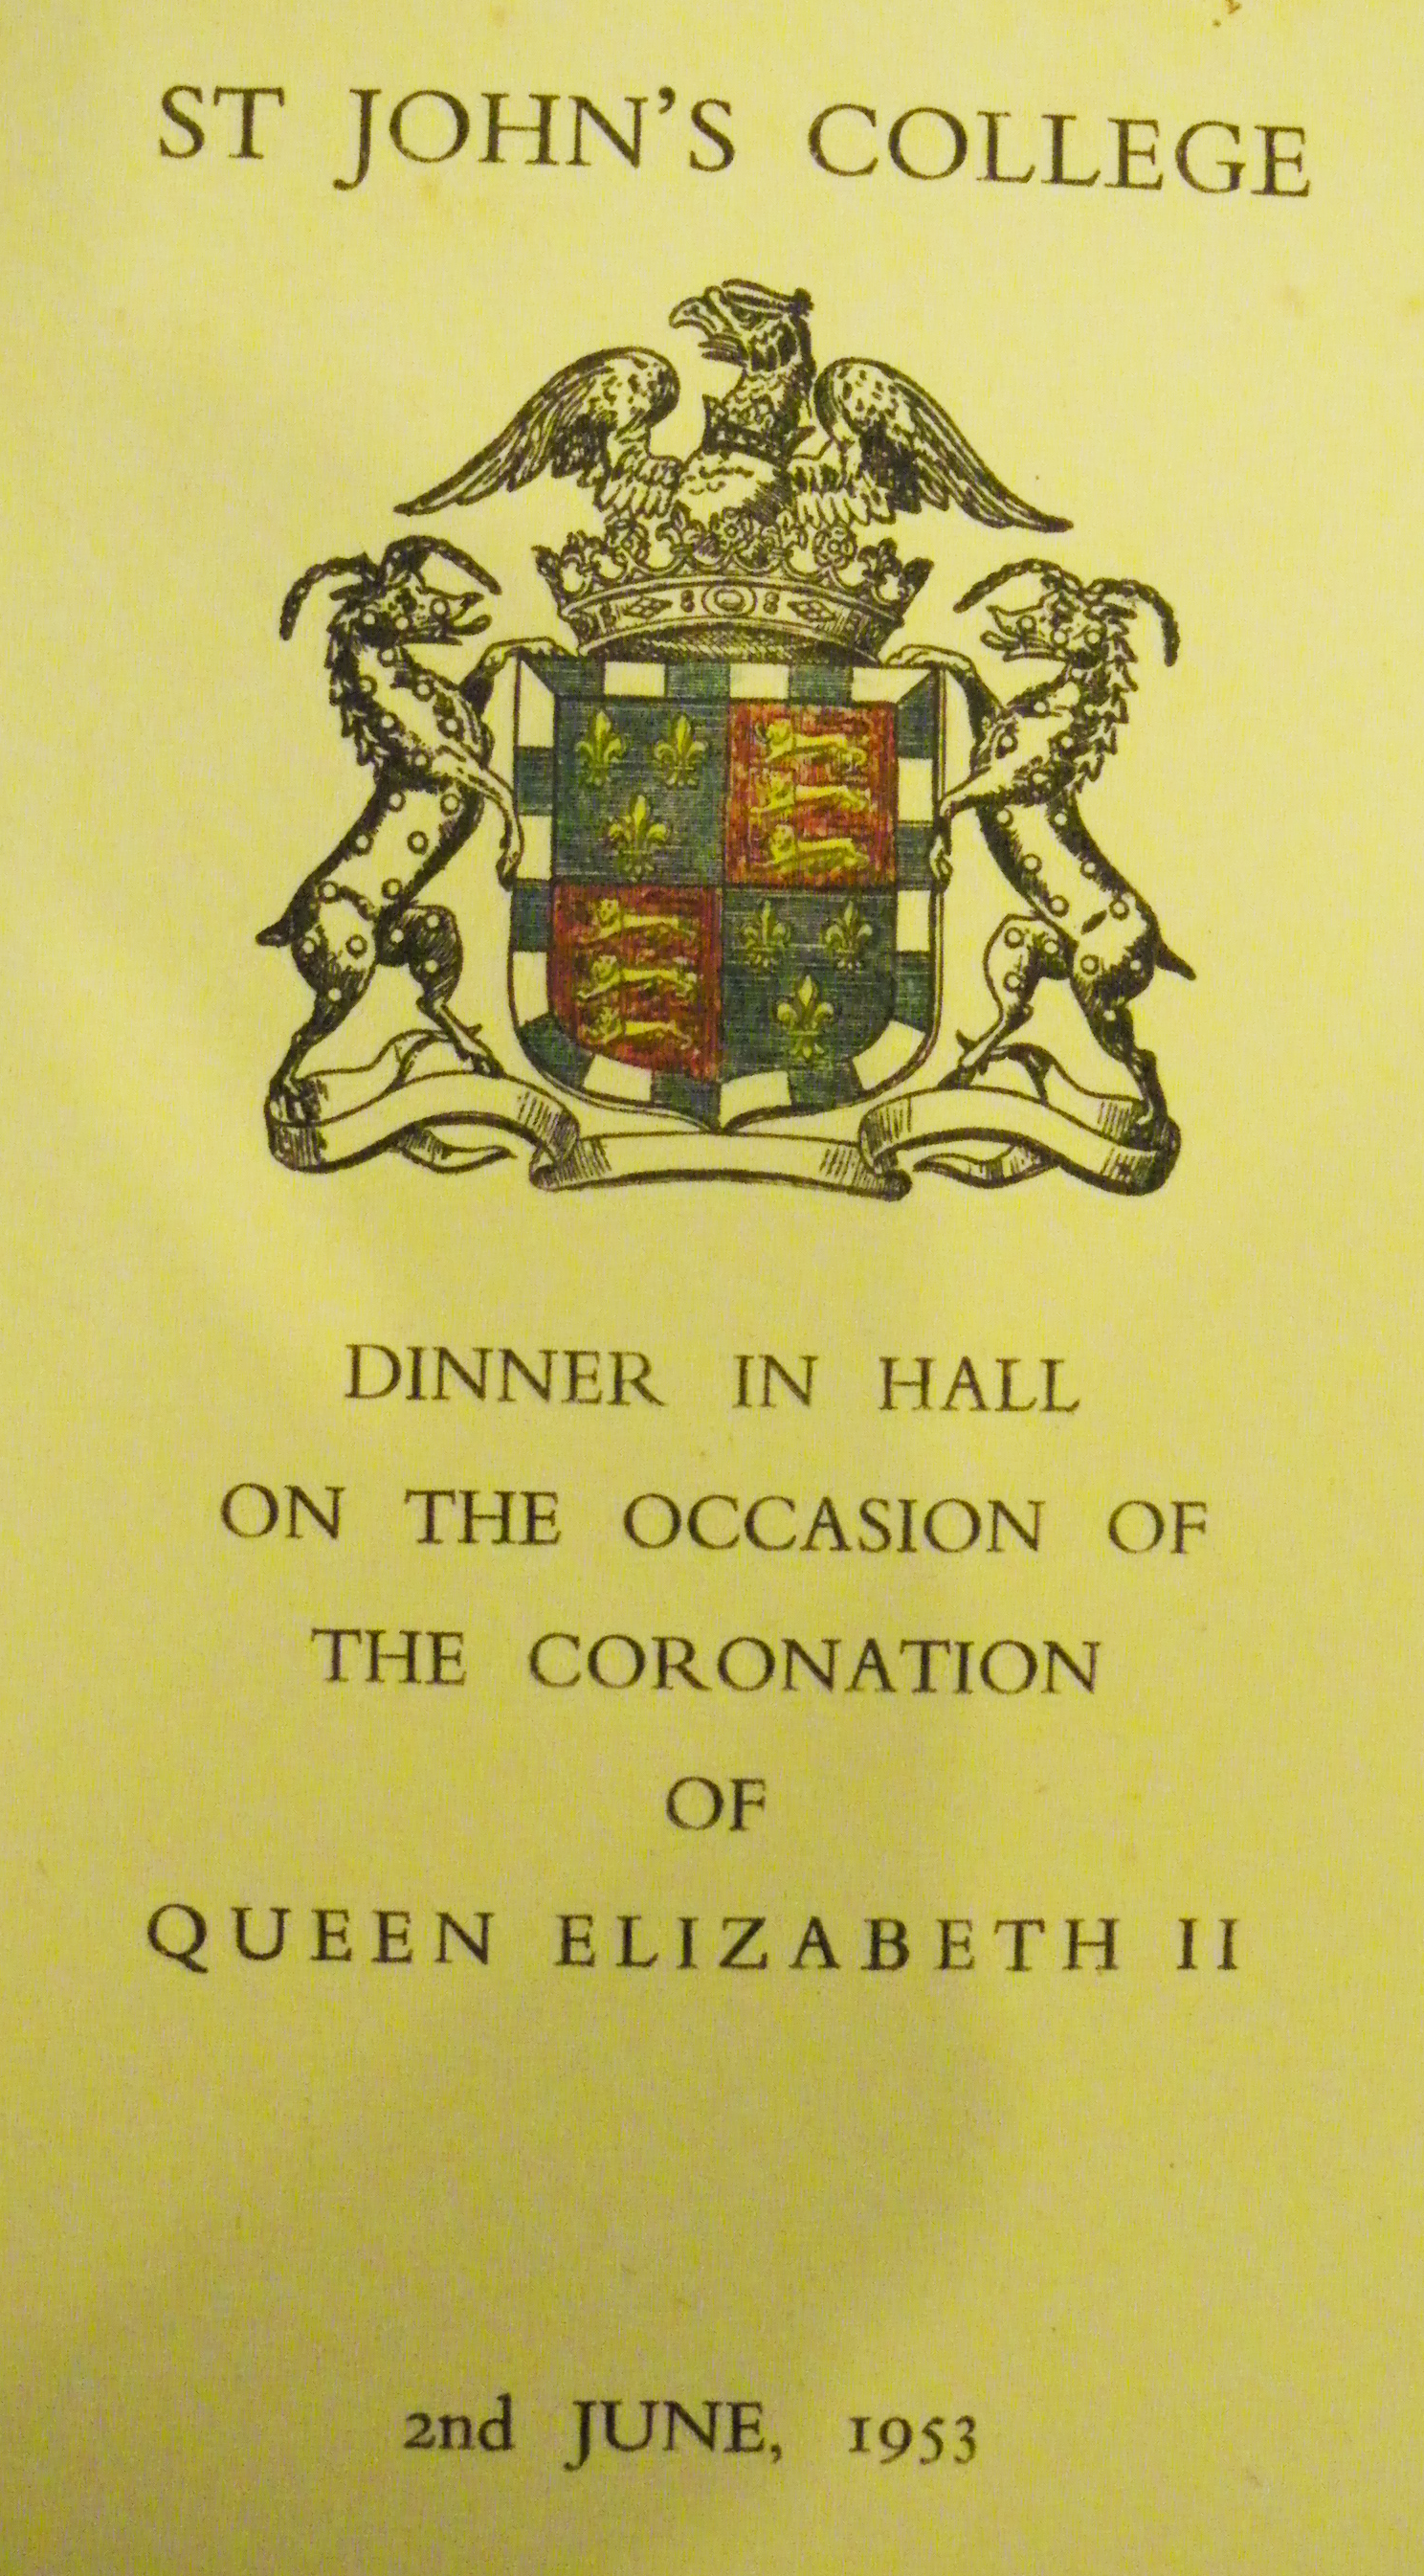 A dinner menu with the college crest.